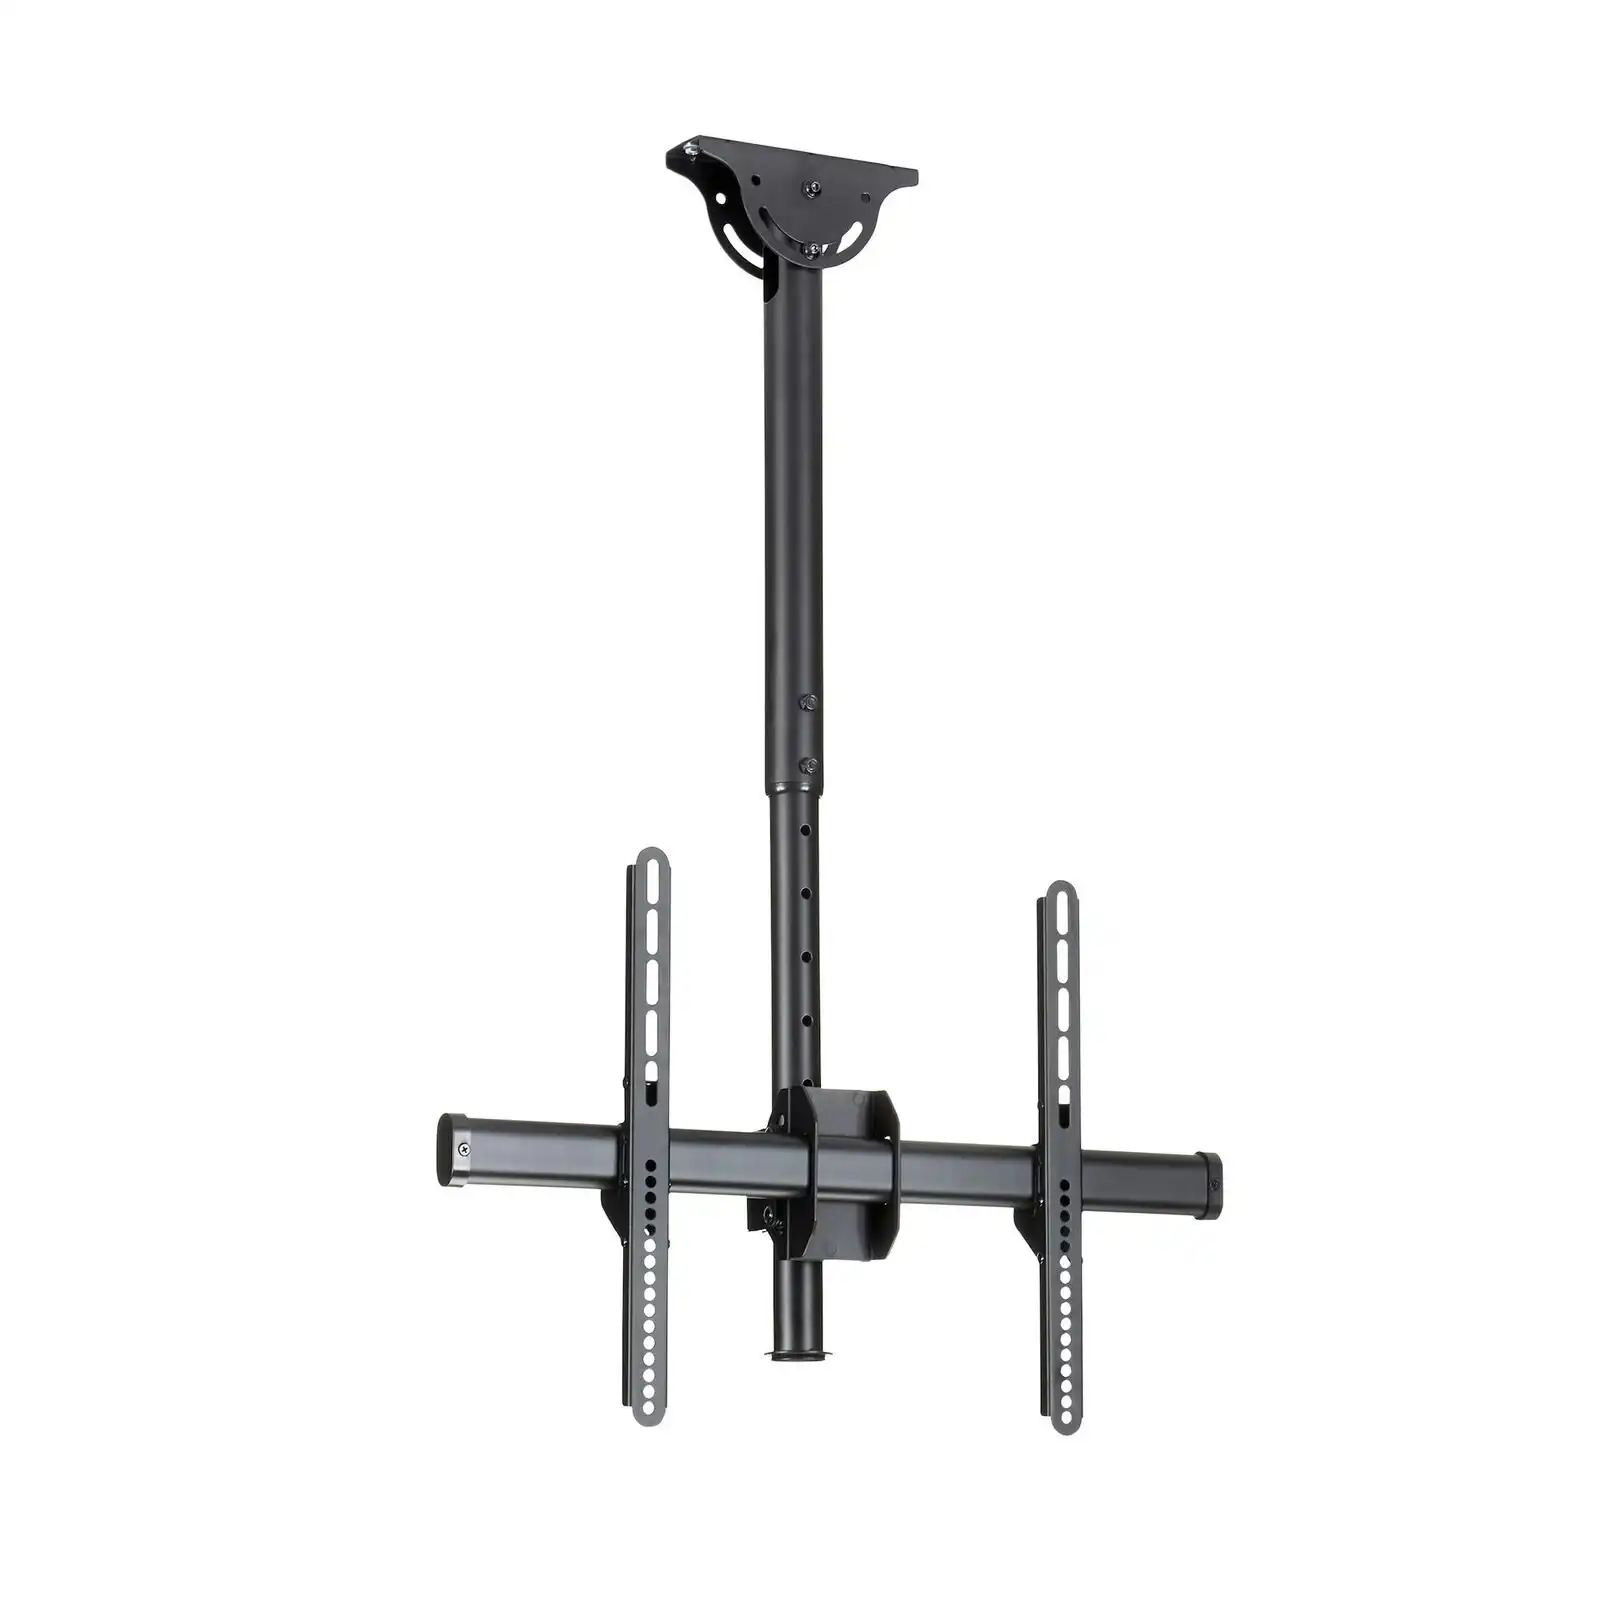 Star Tech Adjustable Pole Full Motion Ceiling TV Mount for 32-75in 50kg Display